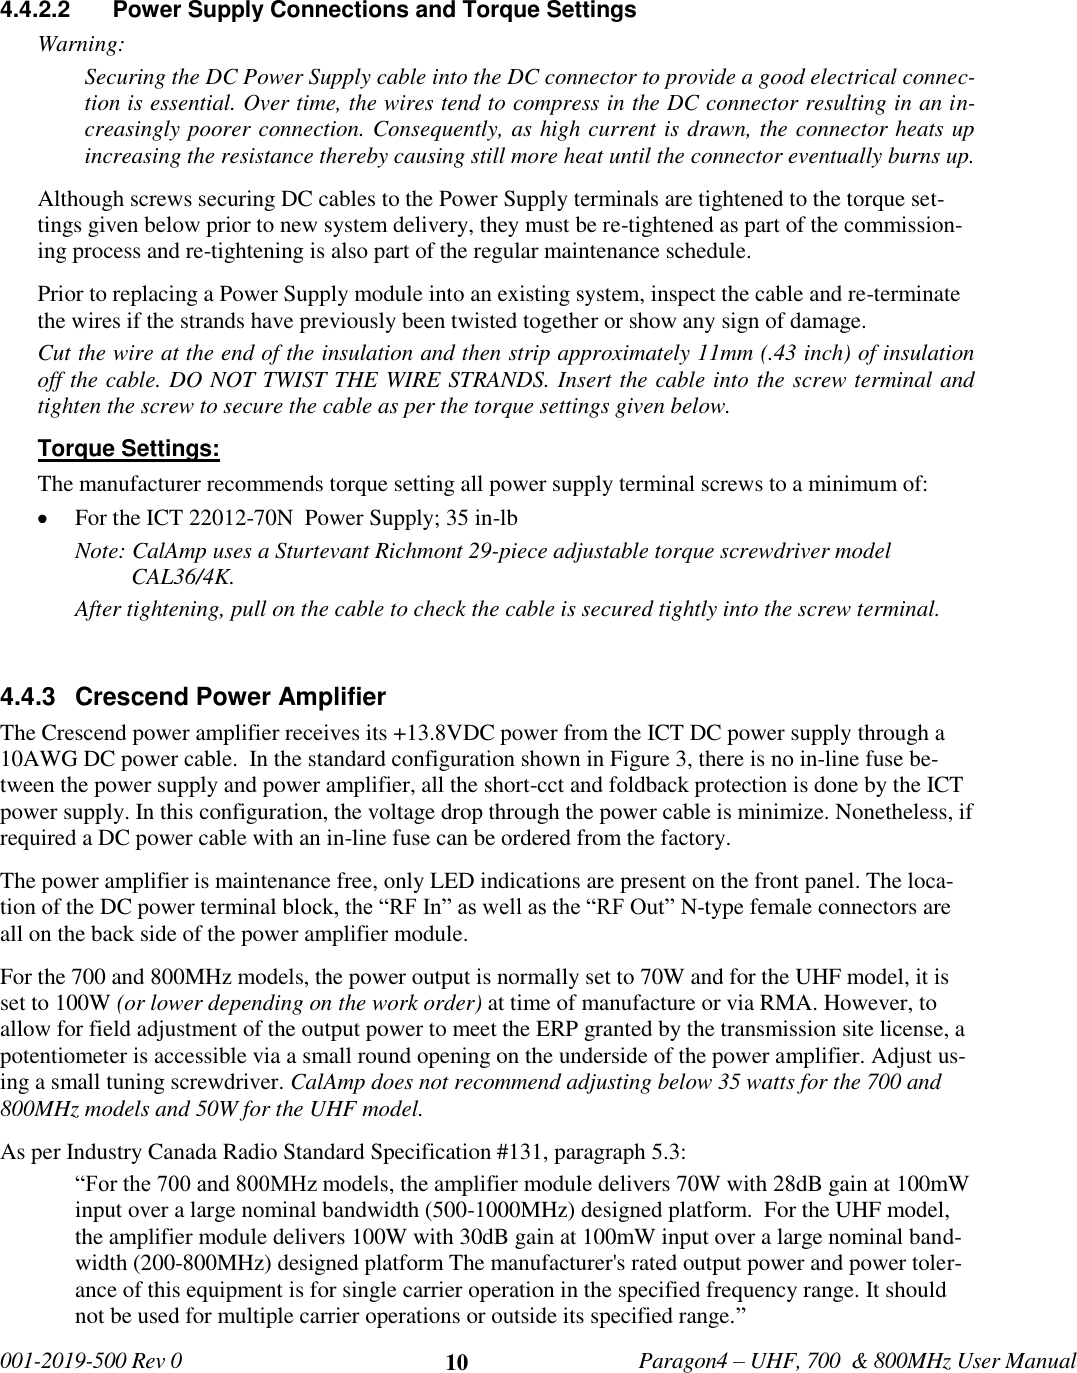   001-2019-500 Rev 0         Paragon4 – UHF, 700  &amp; 800MHz User Manual     10  4.4.2.2  Power Supply Connections and Torque Settings  Warning: Securing the DC Power Supply cable into the DC connector to provide a good electrical connec-tion is essential. Over time, the wires tend to compress in the DC connector resulting in an in-creasingly poorer connection. Consequently, as high current is drawn, the connector heats up increasing the resistance thereby causing still more heat until the connector eventually burns up.  Although screws securing DC cables to the Power Supply terminals are tightened to the torque set-tings given below prior to new system delivery, they must be re-tightened as part of the commission-ing process and re-tightening is also part of the regular maintenance schedule. Prior to replacing a Power Supply module into an existing system, inspect the cable and re-terminate the wires if the strands have previously been twisted together or show any sign of damage. Cut the wire at the end of the insulation and then strip approximately 11mm (.43 inch) of insulation off the cable. DO NOT TWIST THE WIRE STRANDS. Insert the cable into the screw terminal and tighten the screw to secure the cable as per the torque settings given below. Torque Settings: The manufacturer recommends torque setting all power supply terminal screws to a minimum of:  For the ICT 22012-70N  Power Supply; 35 in-lb Note: CalAmp uses a Sturtevant Richmont 29-piece adjustable torque screwdriver model CAL36/4K. After tightening, pull on the cable to check the cable is secured tightly into the screw terminal.  4.4.3  Crescend Power Amplifier The Crescend power amplifier receives its +13.8VDC power from the ICT DC power supply through a 10AWG DC power cable.  In the standard configuration shown in Figure 3, there is no in-line fuse be-tween the power supply and power amplifier, all the short-cct and foldback protection is done by the ICT power supply. In this configuration, the voltage drop through the power cable is minimize. Nonetheless, if required a DC power cable with an in-line fuse can be ordered from the factory. The power amplifier is maintenance free, only LED indications are present on the front panel. The loca-tion of the DC power terminal block, the “RF In” as well as the “RF Out” N-type female connectors are all on the back side of the power amplifier module. For the 700 and 800MHz models, the power output is normally set to 70W and for the UHF model, it is set to 100W (or lower depending on the work order) at time of manufacture or via RMA. However, to allow for field adjustment of the output power to meet the ERP granted by the transmission site license, a potentiometer is accessible via a small round opening on the underside of the power amplifier. Adjust us-ing a small tuning screwdriver. CalAmp does not recommend adjusting below 35 watts for the 700 and 800MHz models and 50W for the UHF model.  As per Industry Canada Radio Standard Specification #131, paragraph 5.3: “For the 700 and 800MHz models, the amplifier module delivers 70W with 28dB gain at 100mW input over a large nominal bandwidth (500-1000MHz) designed platform.  For the UHF model,  the amplifier module delivers 100W with 30dB gain at 100mW input over a large nominal band-width (200-800MHz) designed platform The manufacturer&apos;s rated output power and power toler-ance of this equipment is for single carrier operation in the specified frequency range. It should not be used for multiple carrier operations or outside its specified range.” 